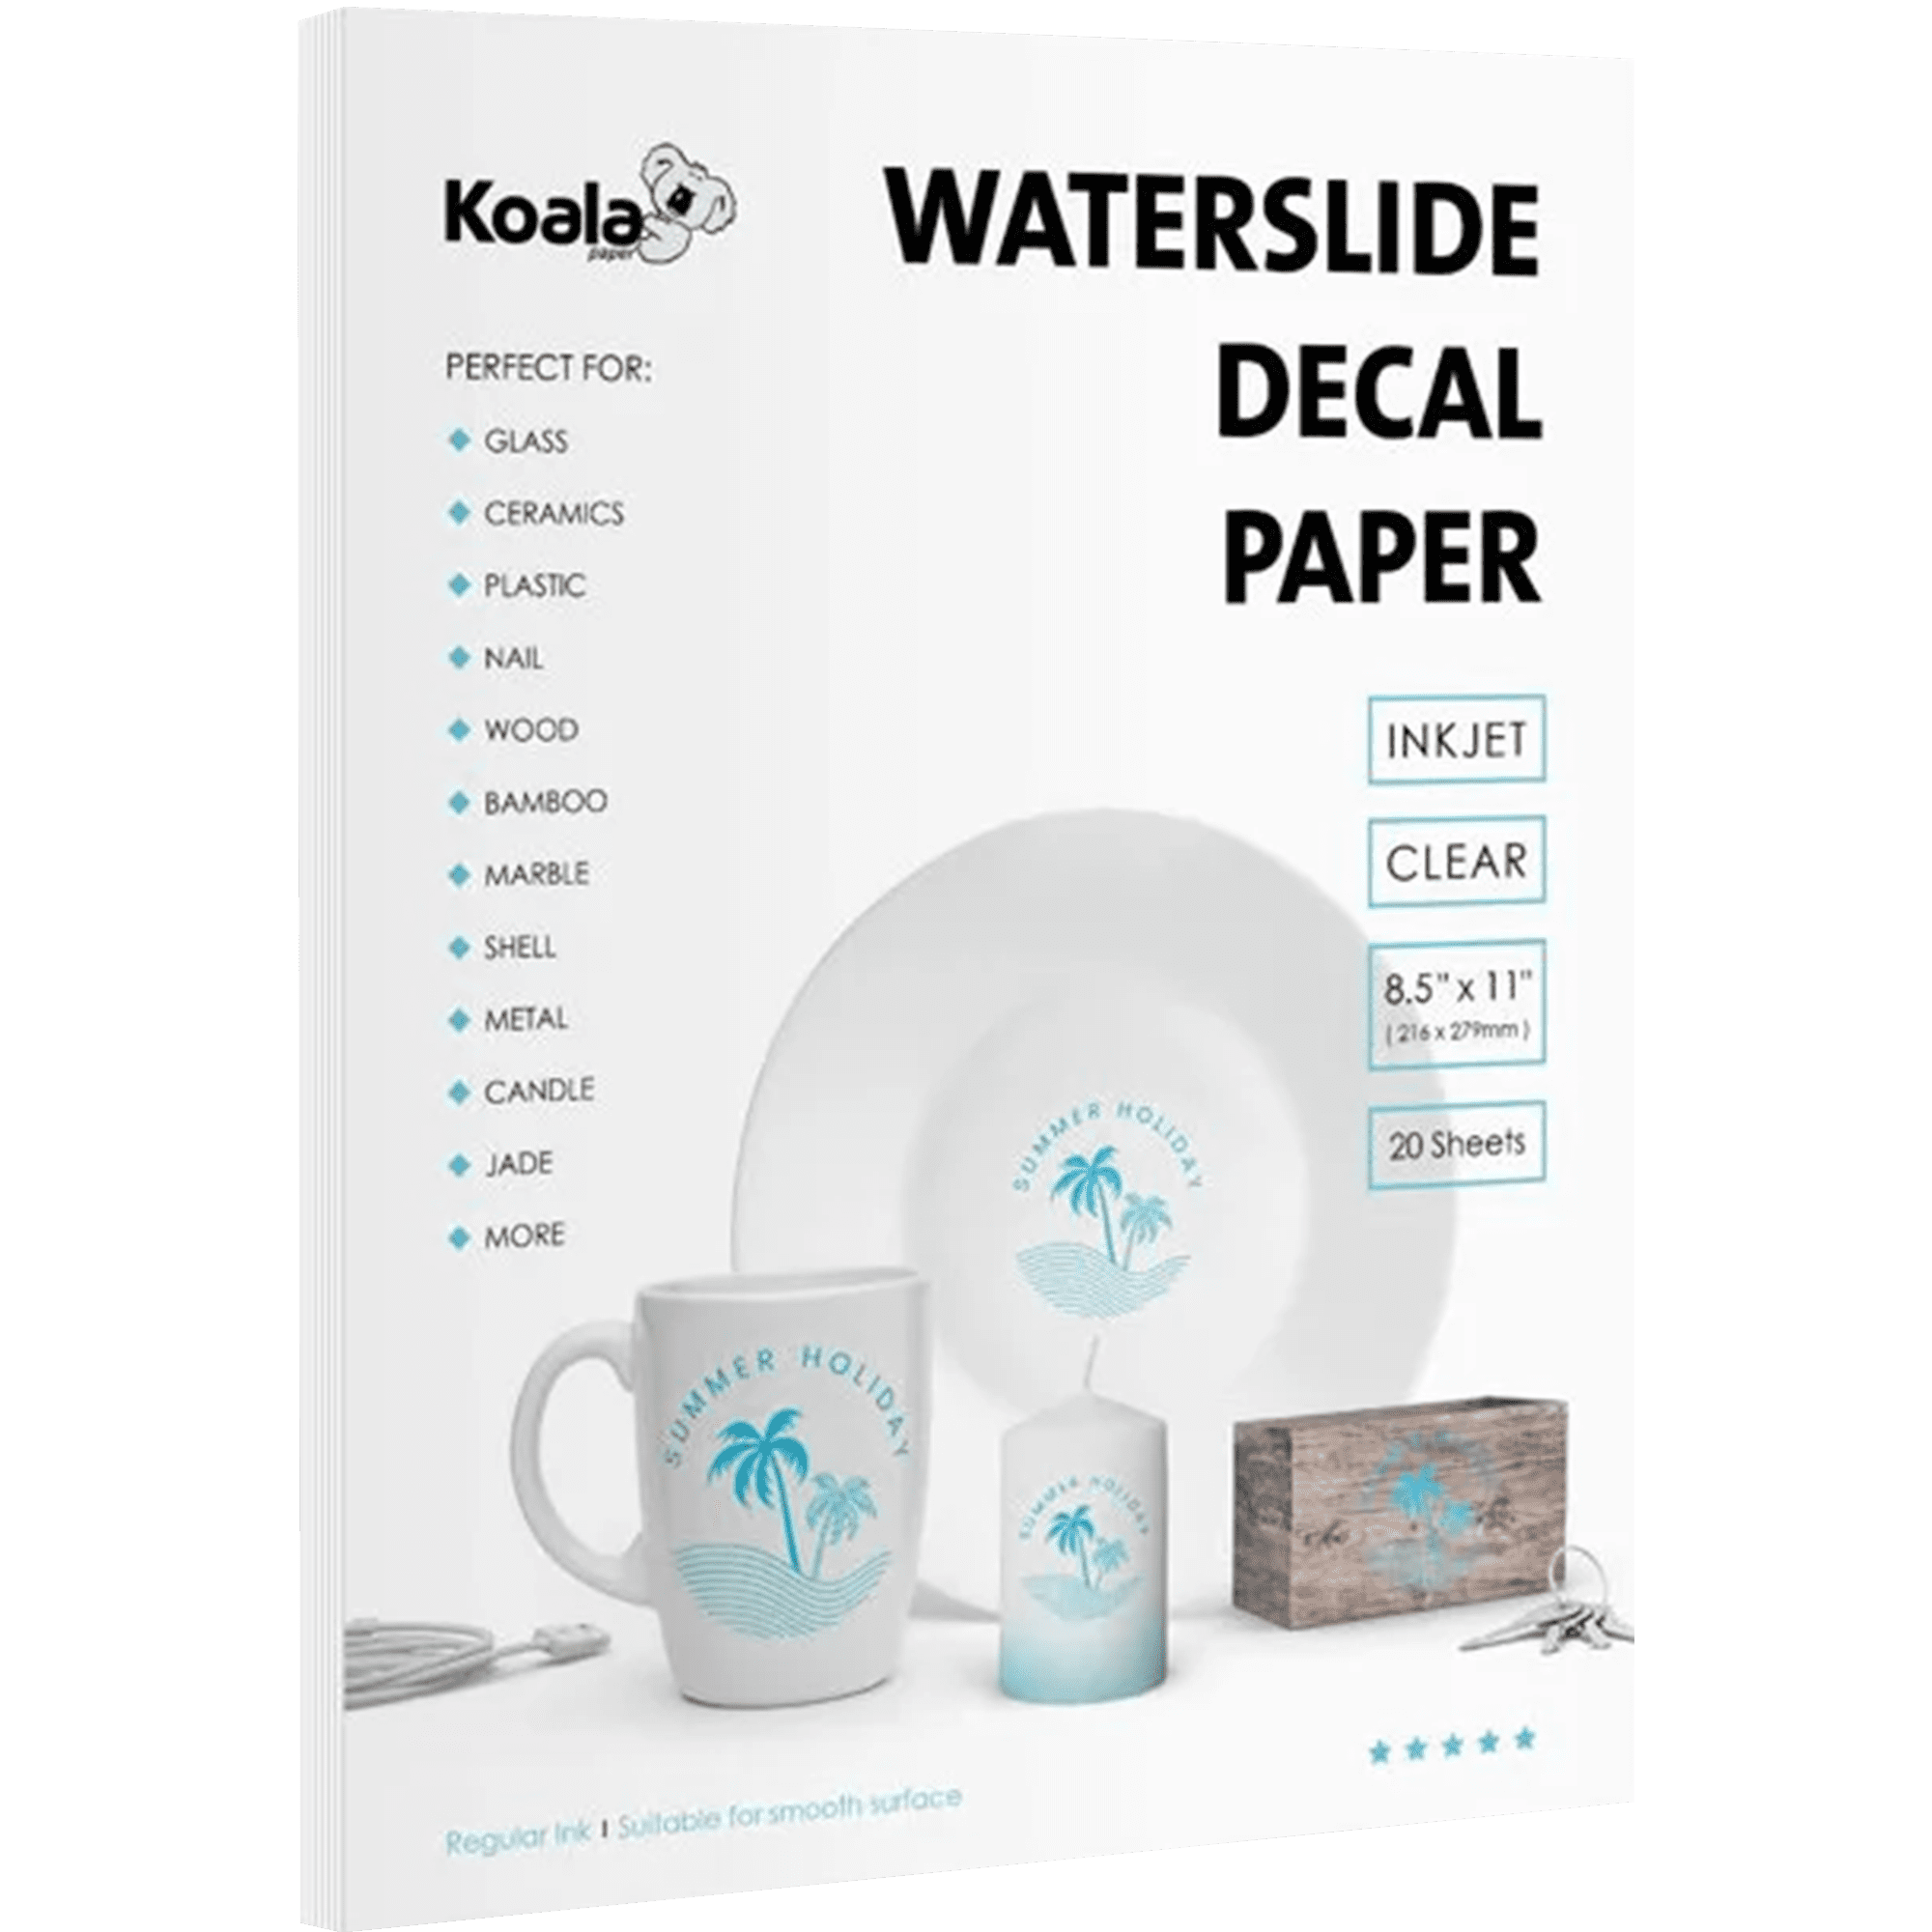  Koala Waterslide Decal Paper INKJET CLEAR, 20 Sheets 8.5x11  Inch Water Slide Transfer Paper Transparent Printable Waterslide Paper for  DIY Tumbler, Mug, Nails : Office Products